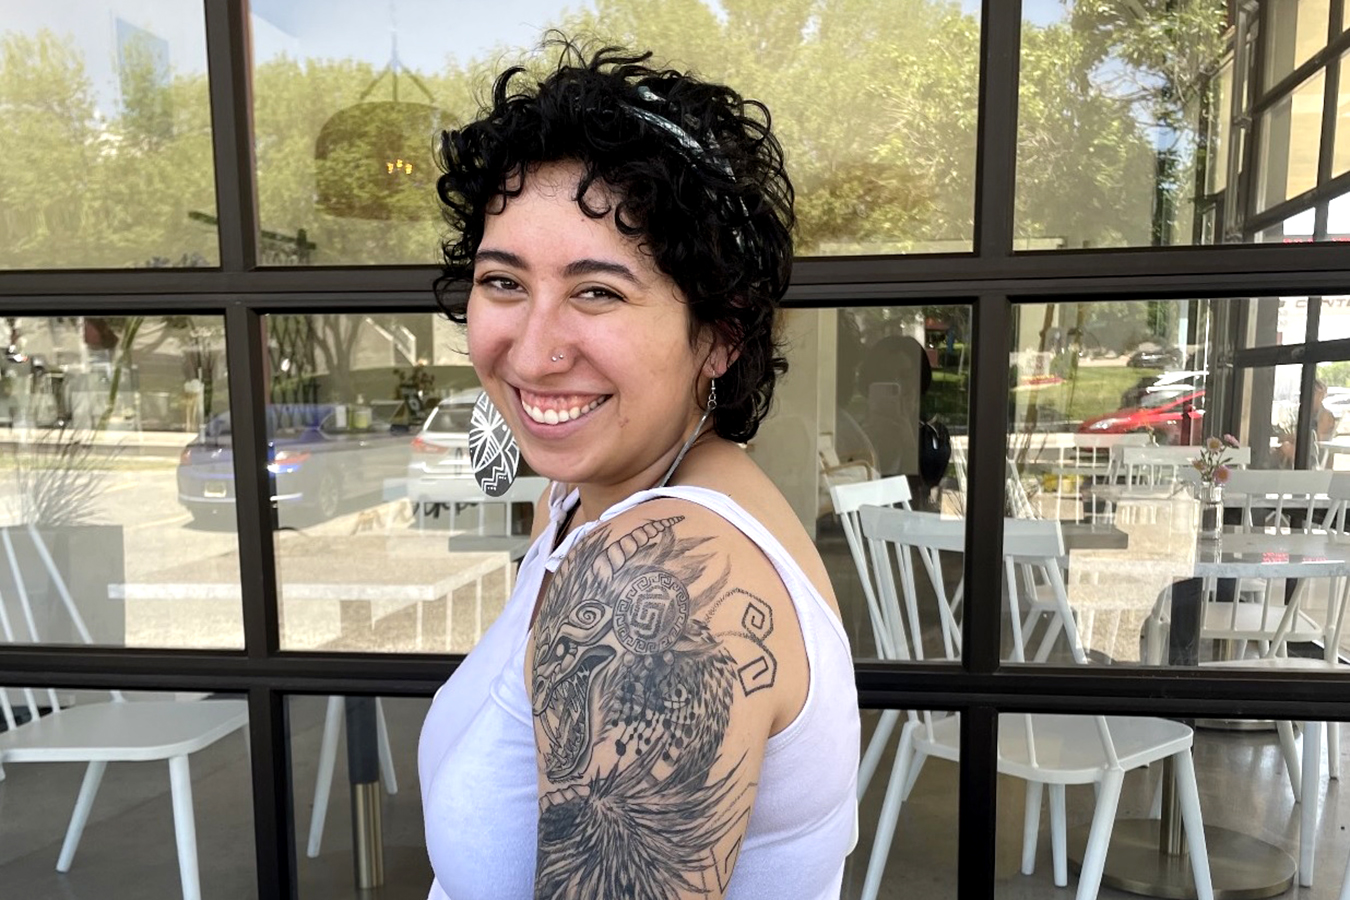 Jessica N. Rueda, a summer 2021 intern, is currently studying Art History at The University of New Mexico. She is a self-taught artist with a passion for art history, researching, and writing scholarly articles. 

